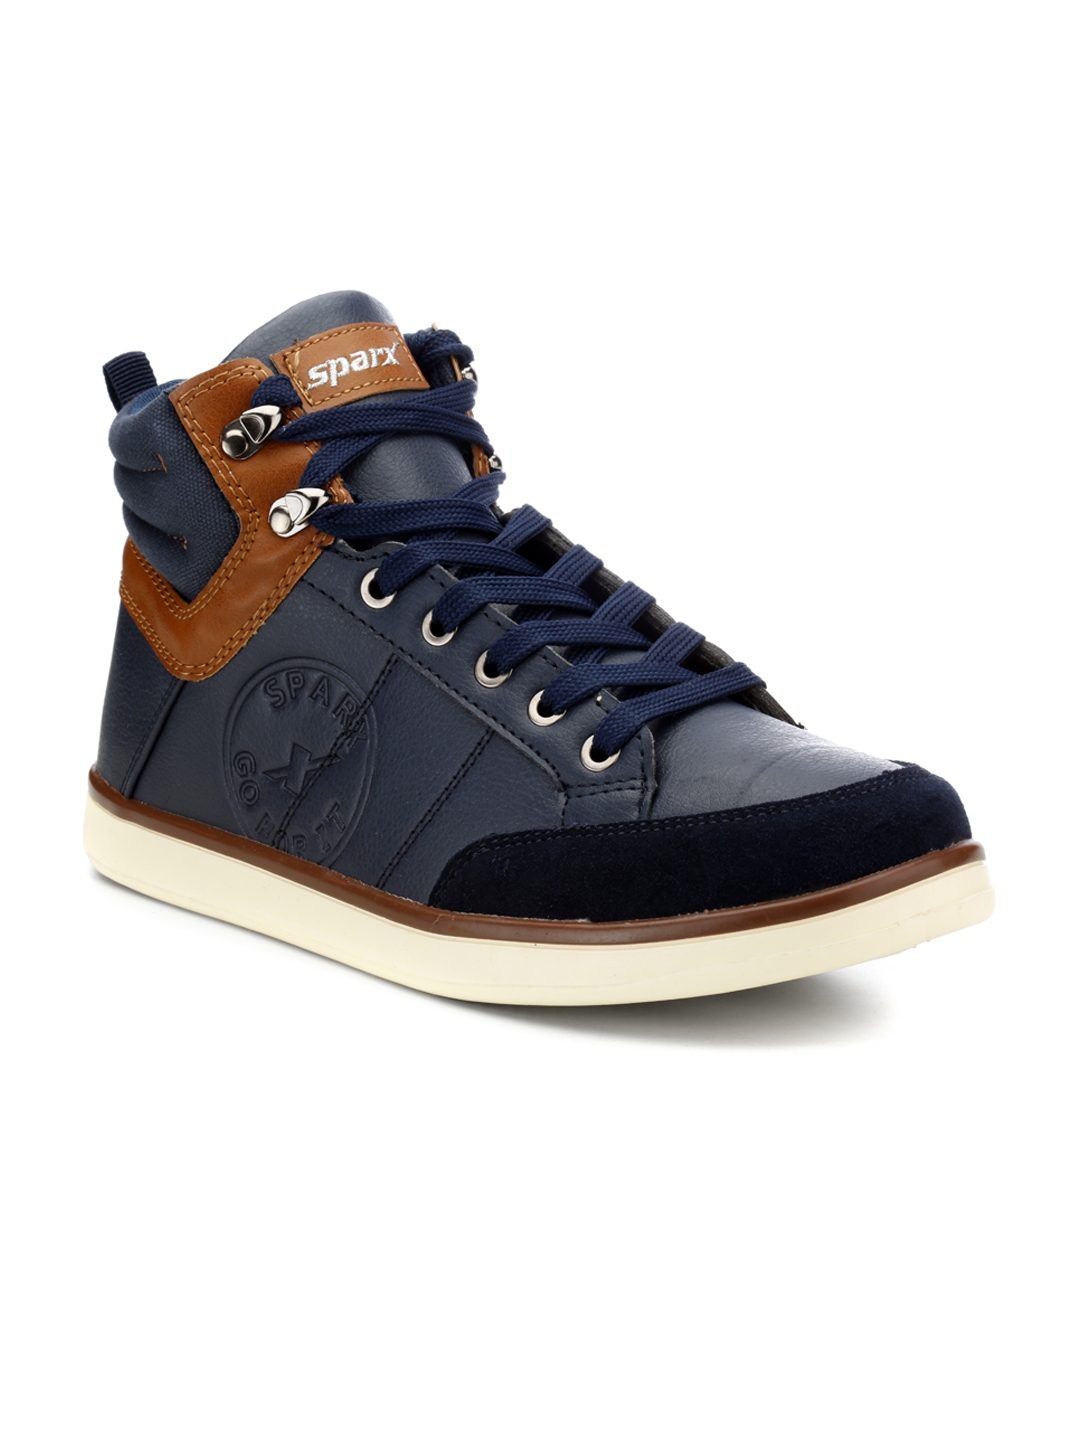 sparx men's synthetic sneakers